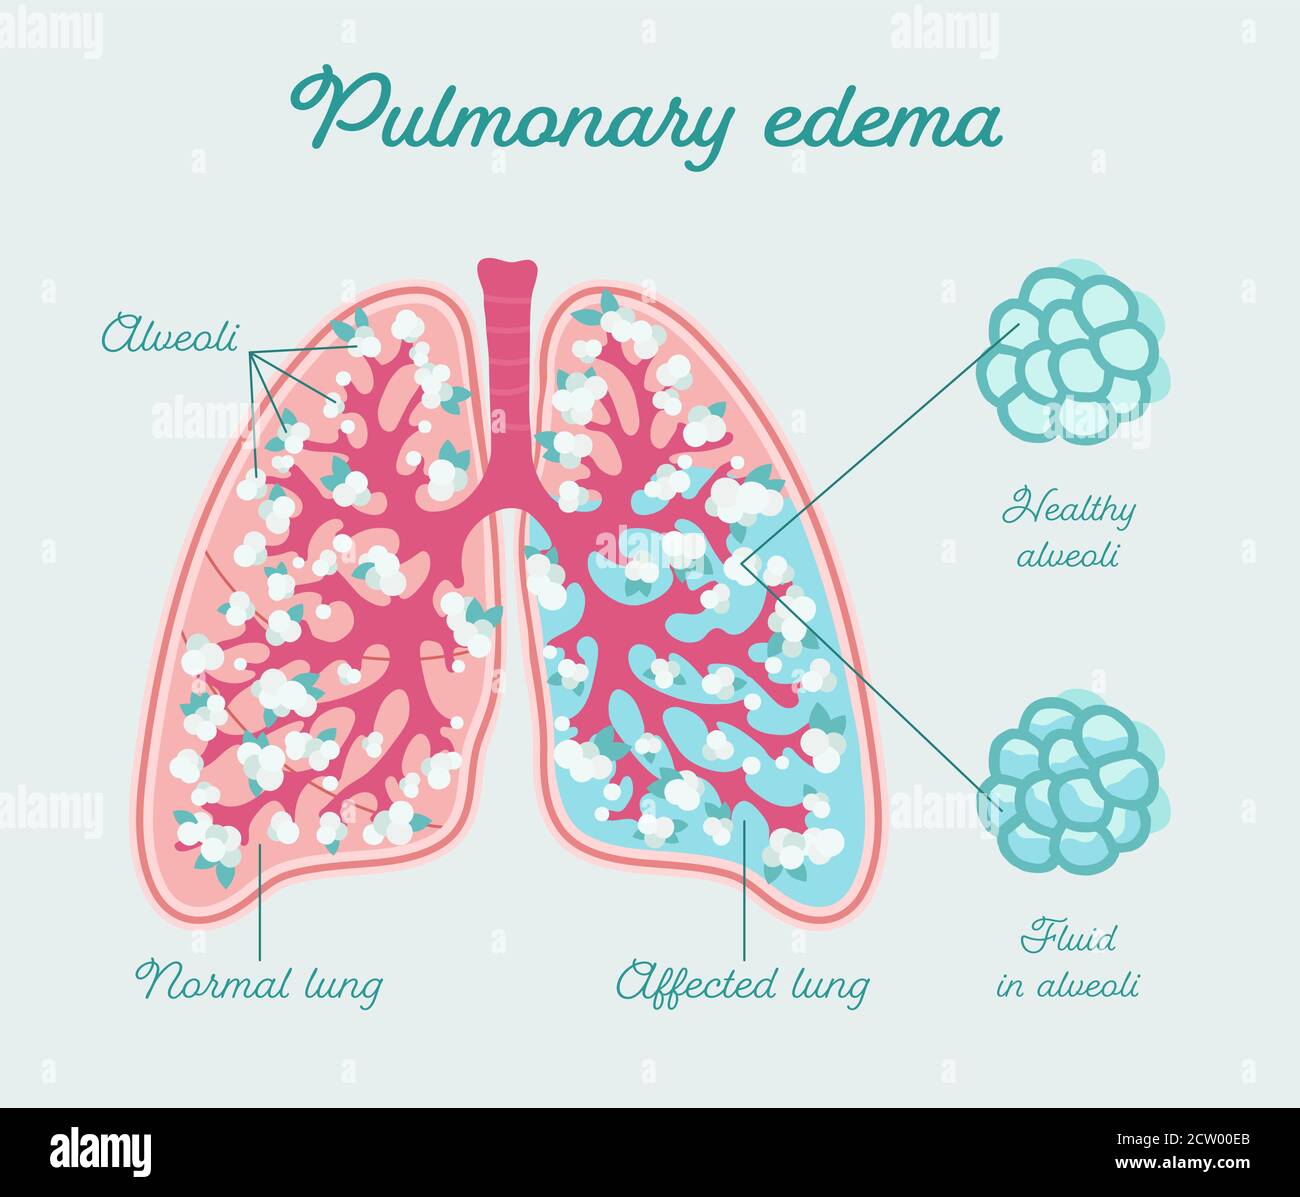 Pulmonary edema, edema of lung. Fluid in alveoli - vector anatomical scheme. Comparison healthy and fill of liquid lungs Stock Vector